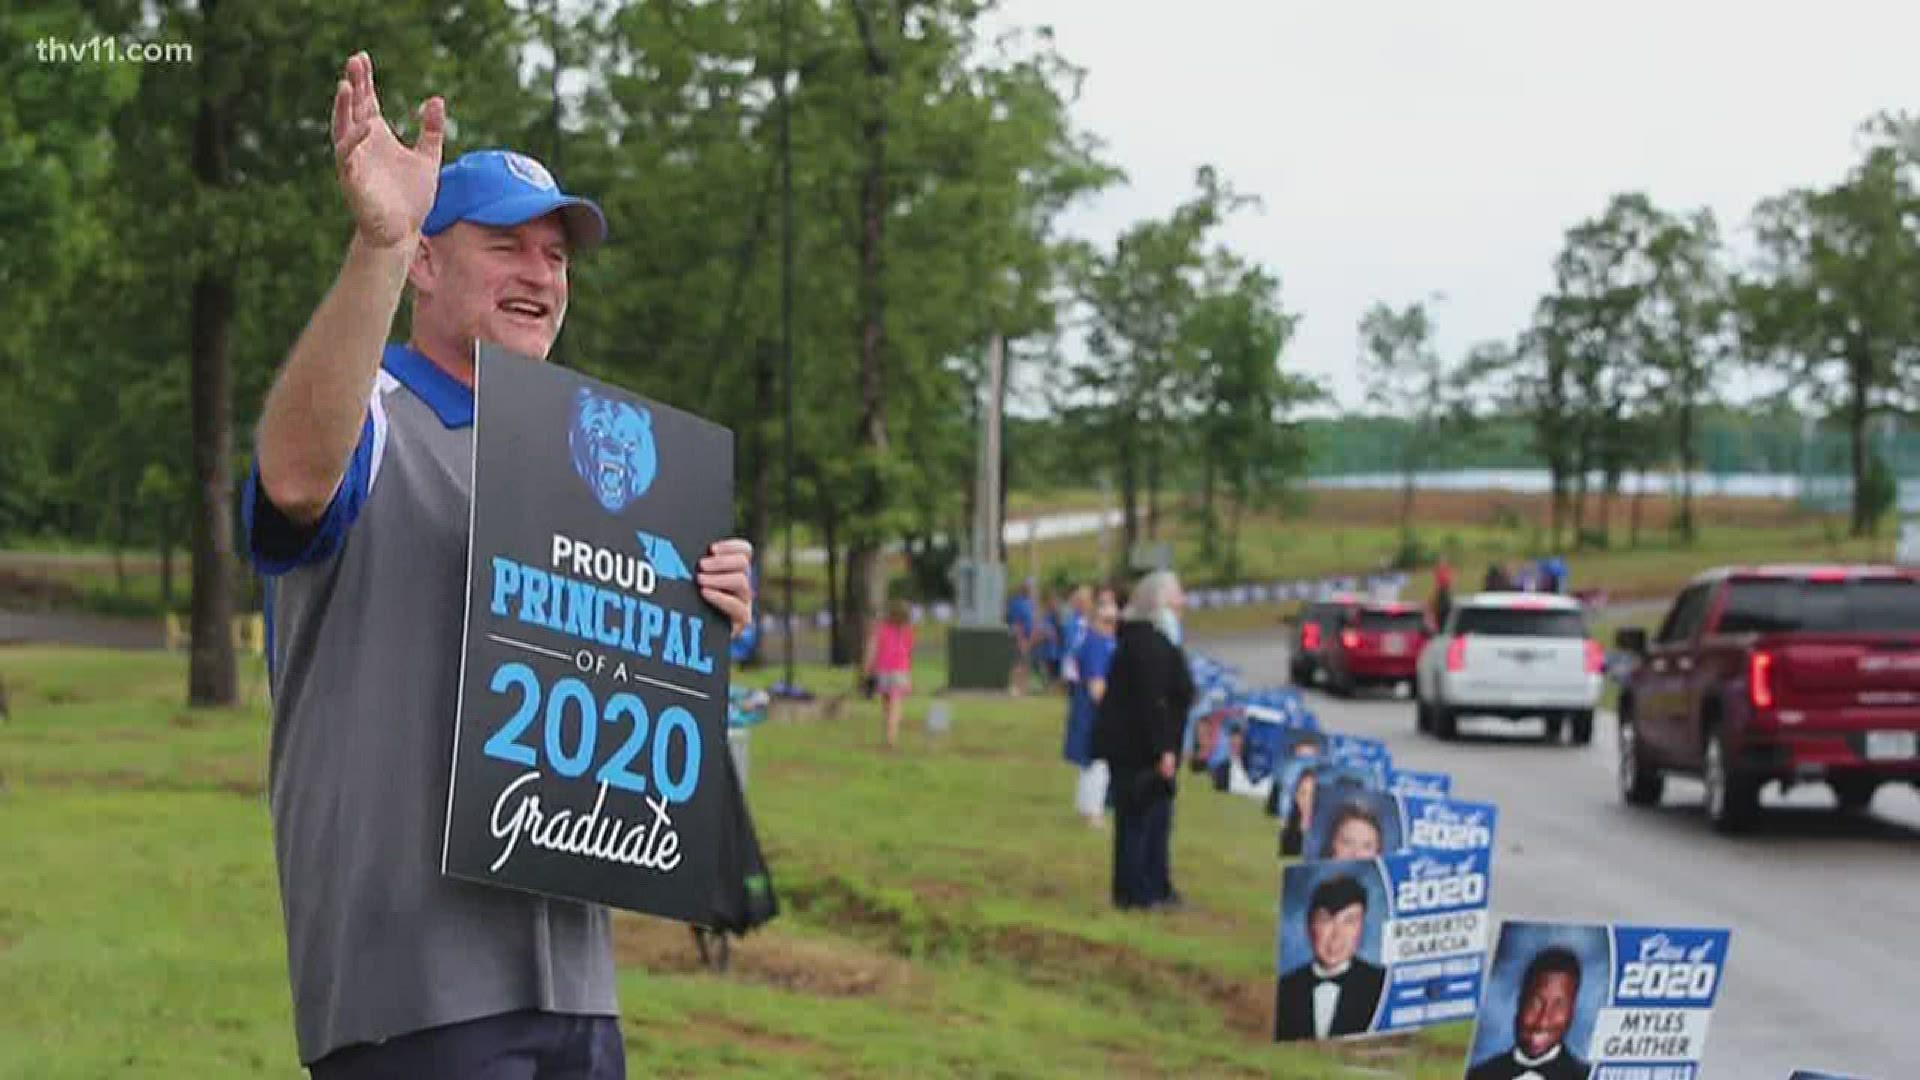 The 'Trail of Seniors' parade honored the 2020 graduates from Sylvan Hills High School.